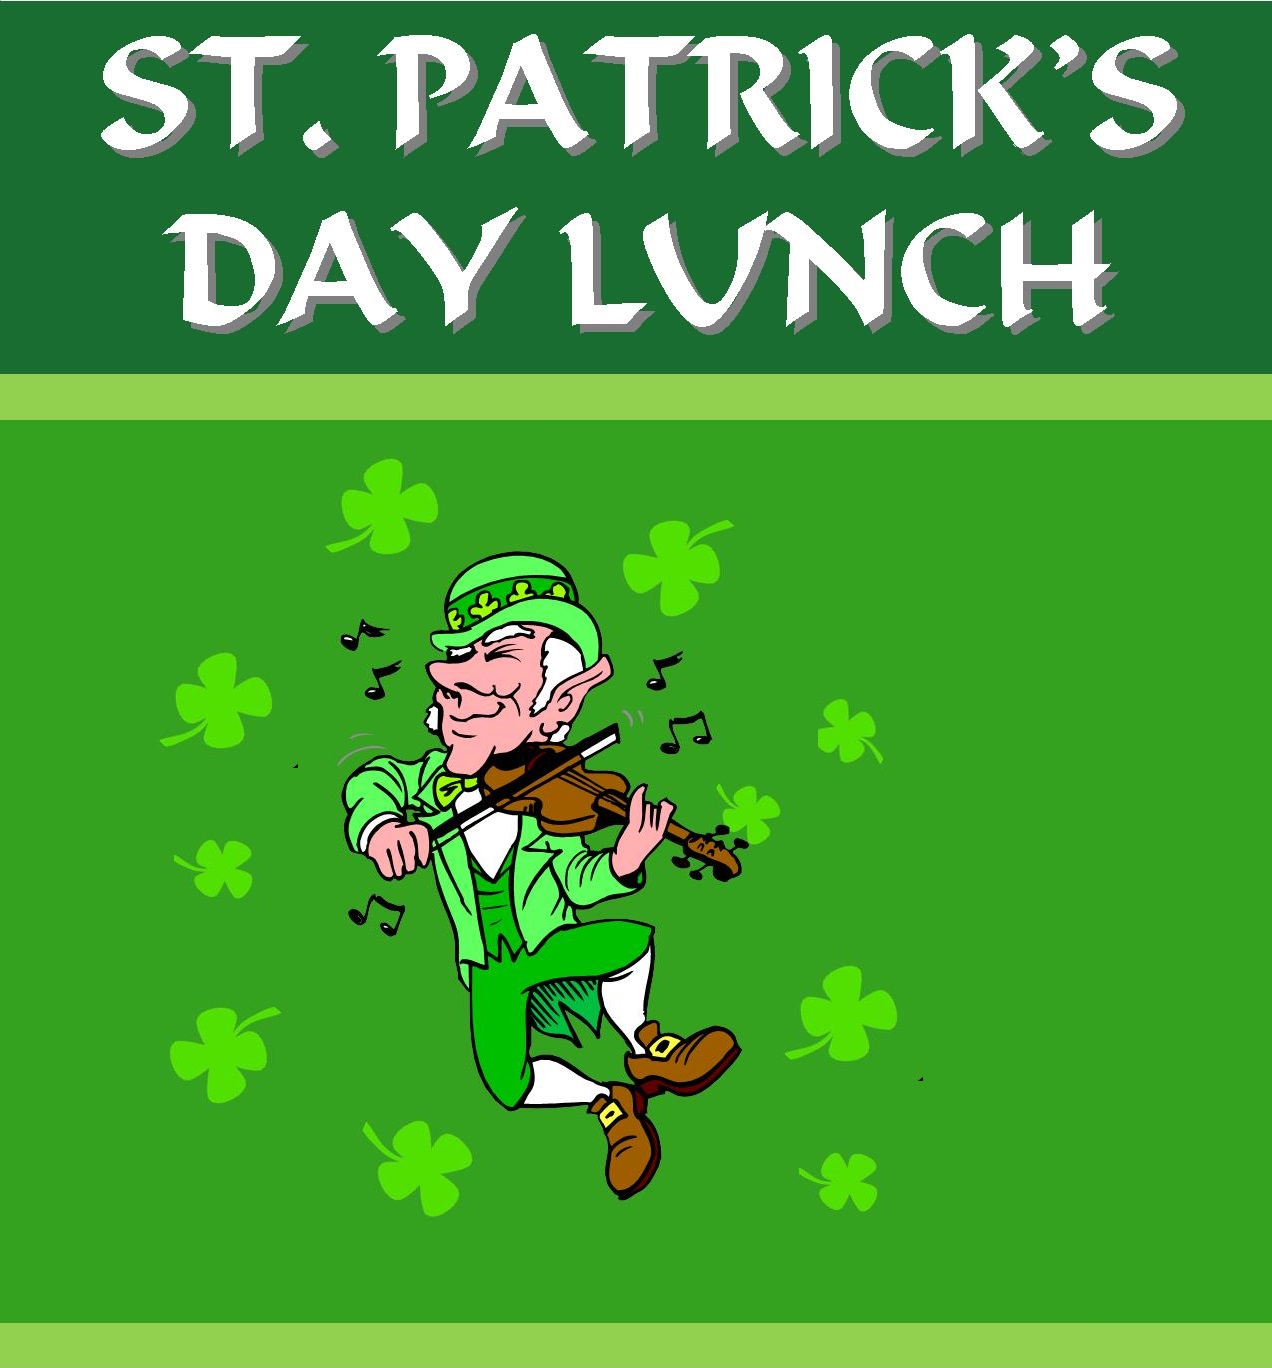 St. Patrick's Day Lunch